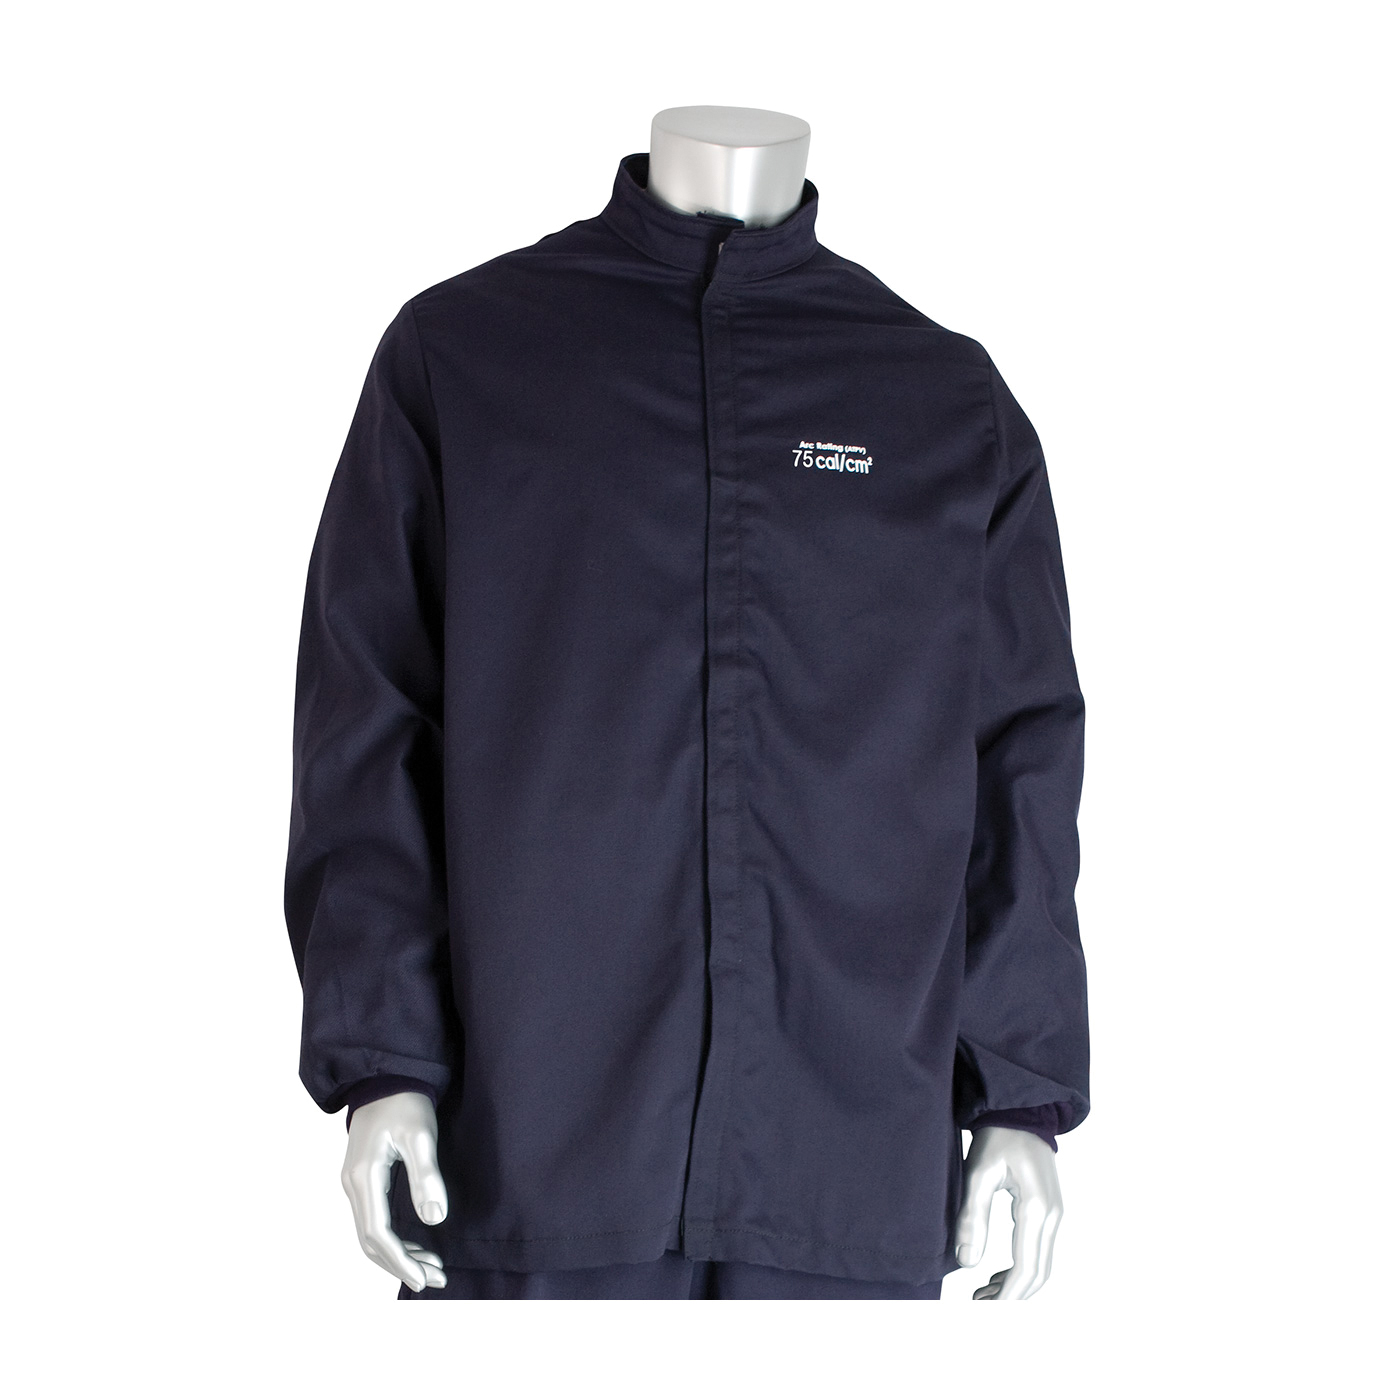 PIP® 9100-75000/2X Arc and Flame Resistant Jacket, 2XL, Navy, Westex® UltraSoft® 88% Cotton 12% High Tenacity Nylon, 52 to 54 in Chest, Resists: Arc and Flame, ASTM F1506-10a, ASTM F2178-12